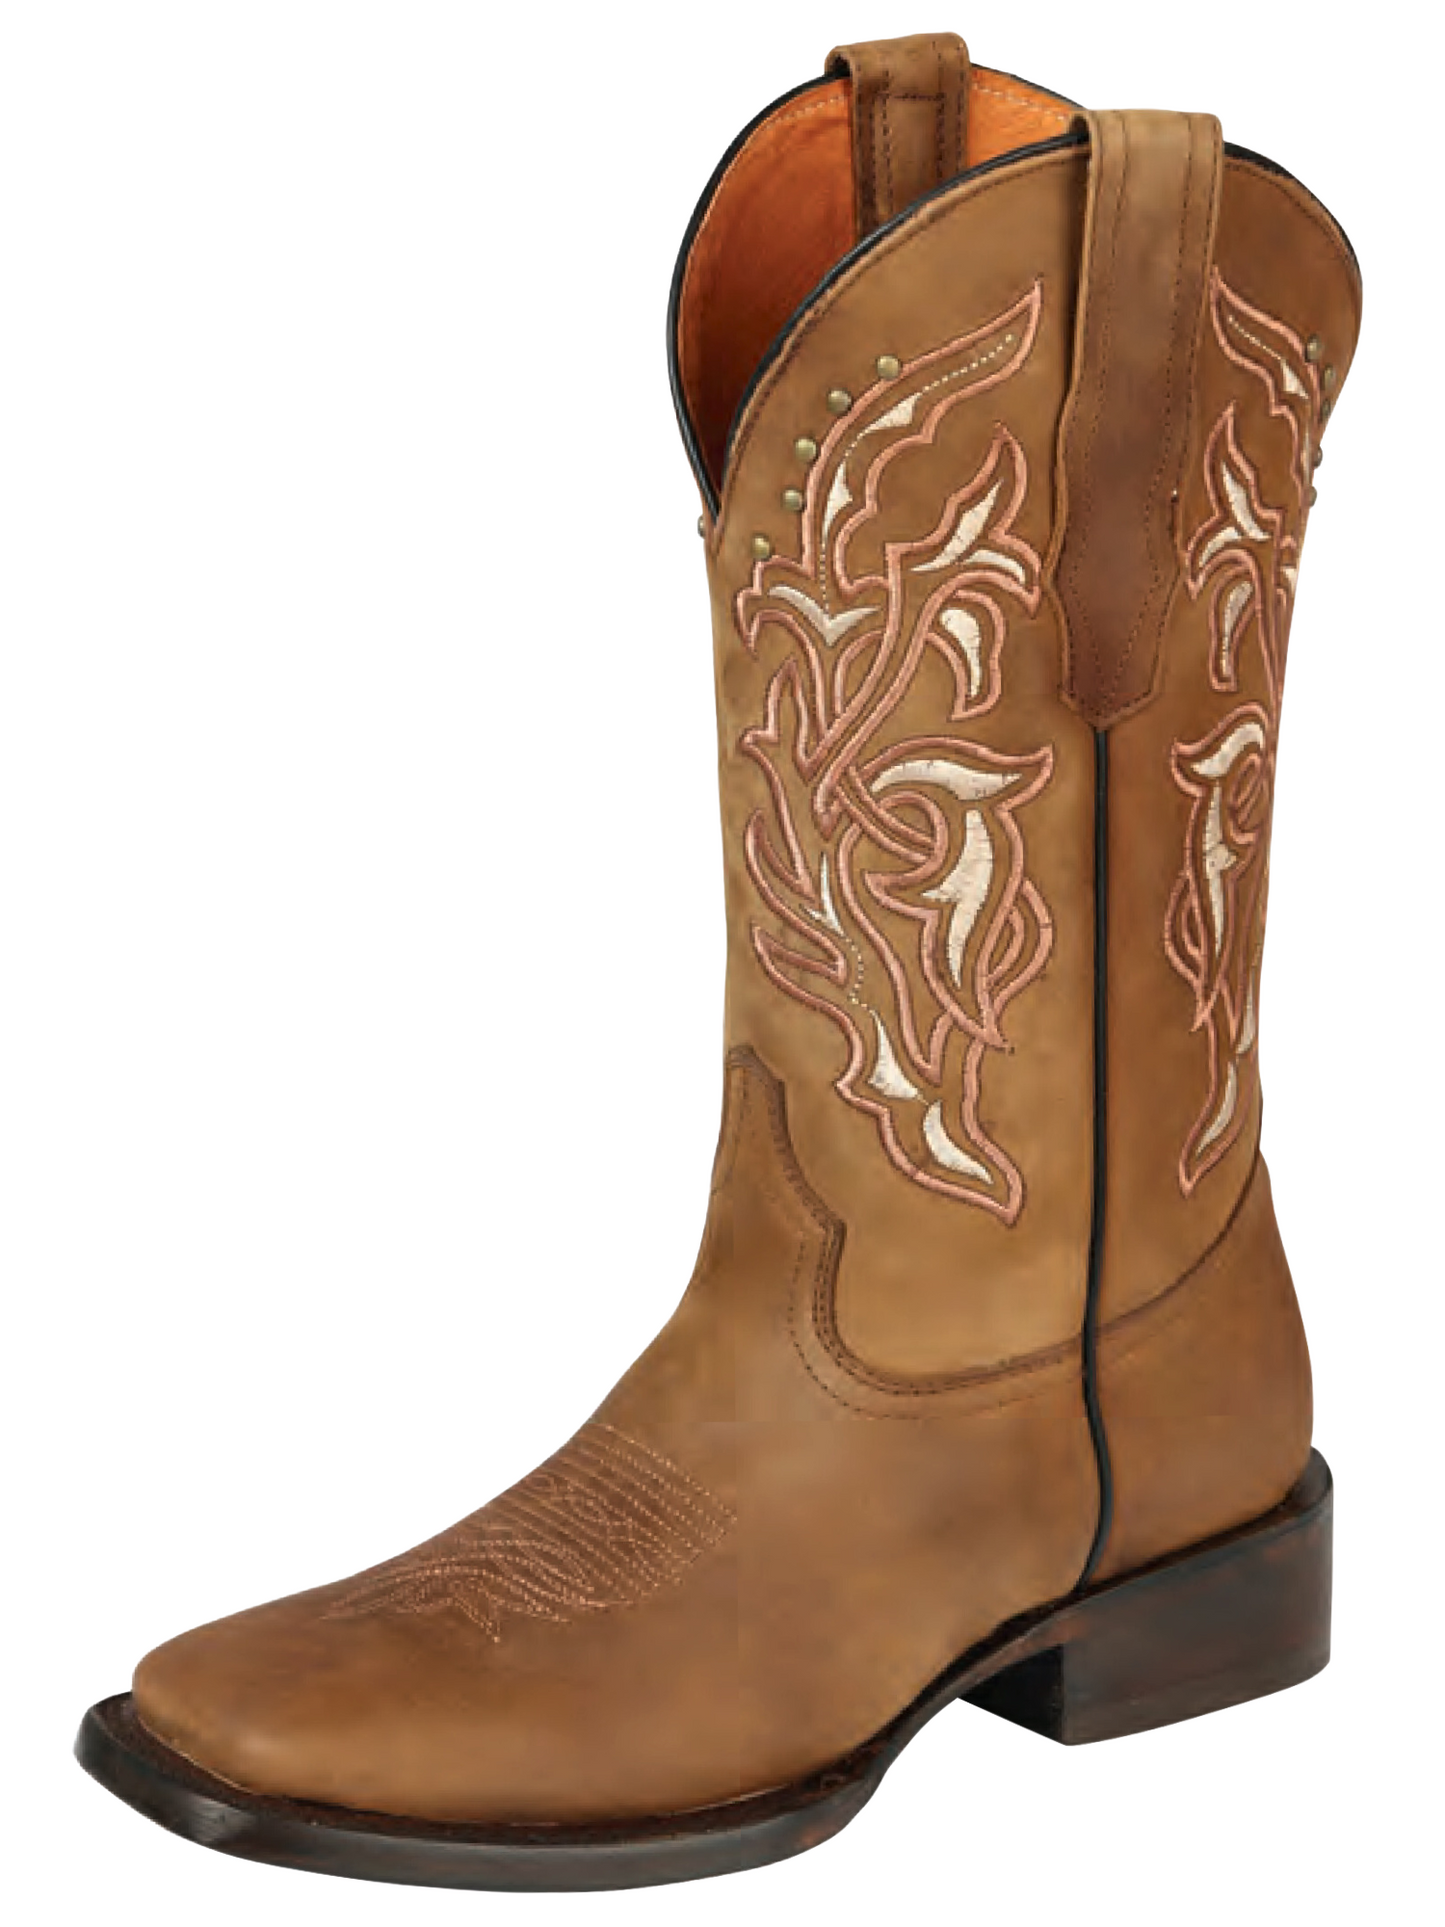 Classic Genuine Leather Rodeo Cowboy Boots for Women 'El General' - ID: 44649 Cowgirl Boots El General